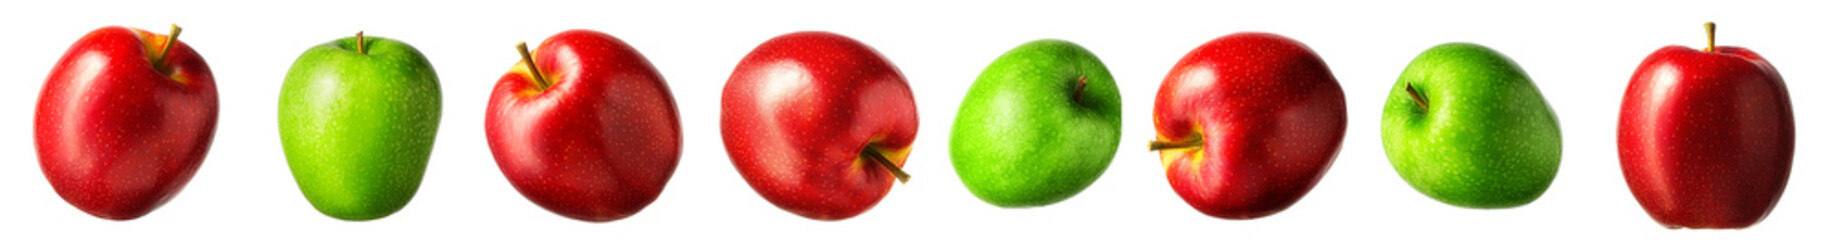 Sticker - Group of red and green apples on white background